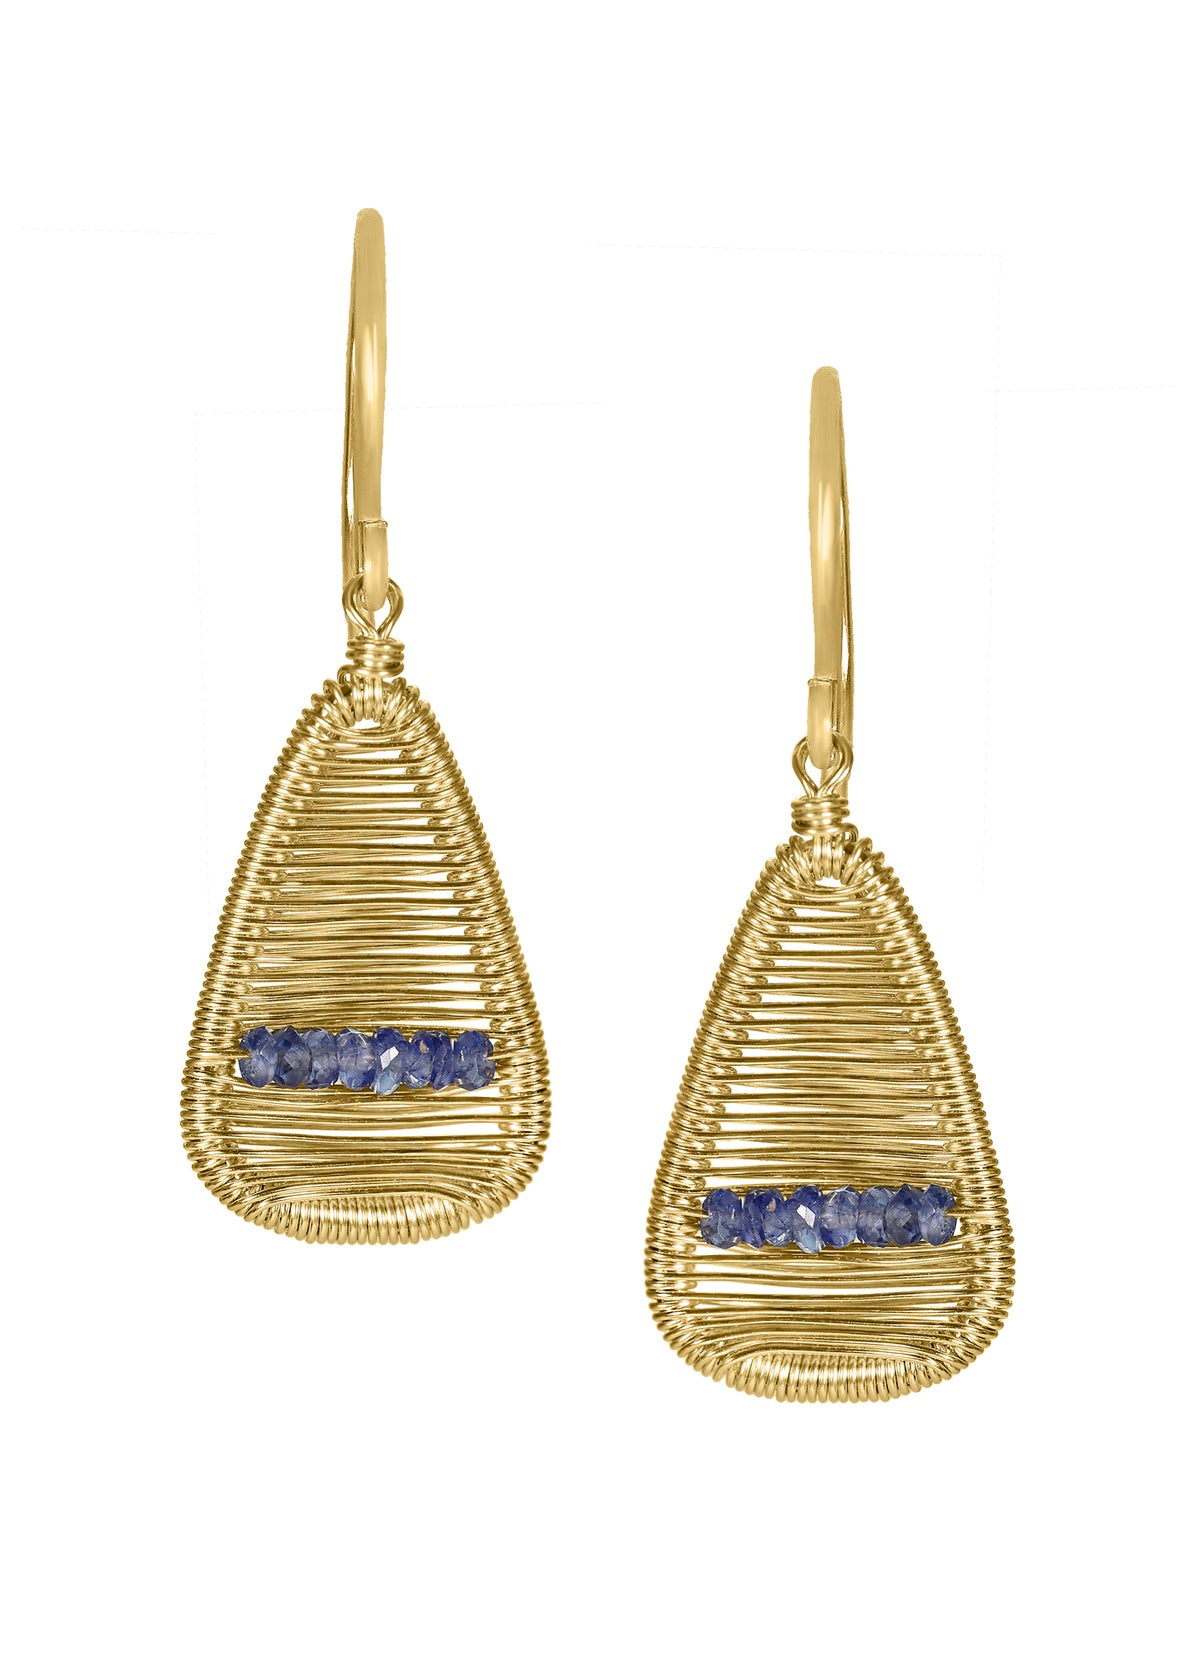 Blue sapphire 14k gold fill Earrings measure 1-1/8&quot; in length (including ear wires) and 1/2&quot; in width at the widest point Handmade in our Los Angeles studio